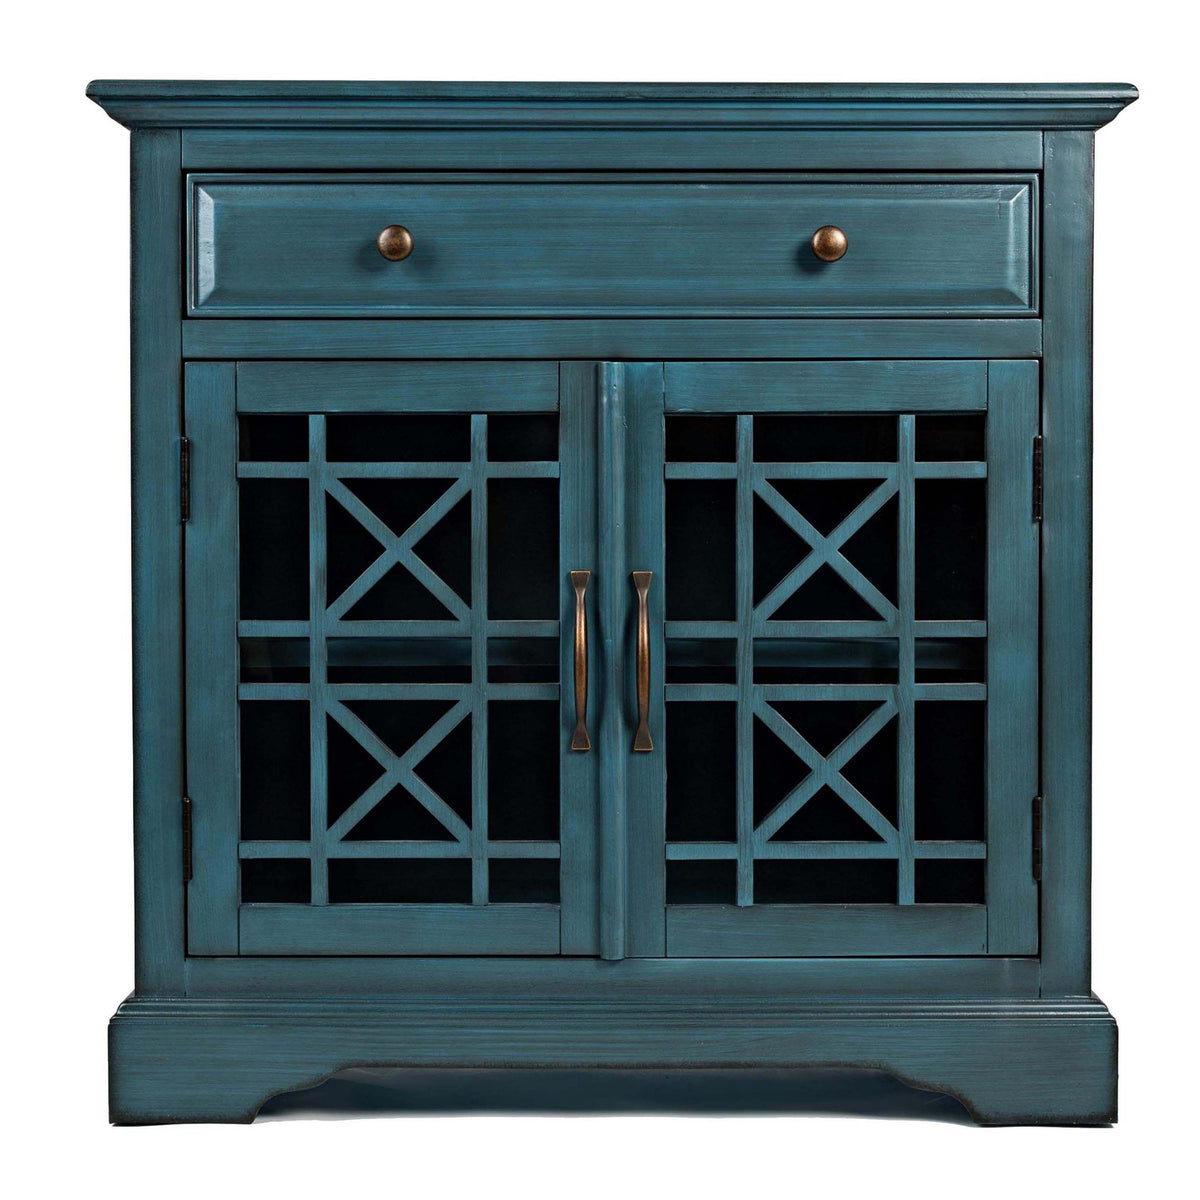 Craftsman Series 32 Inch Wooden Accent Cabinet with Fretwork Glass Front, Blue - BM183988